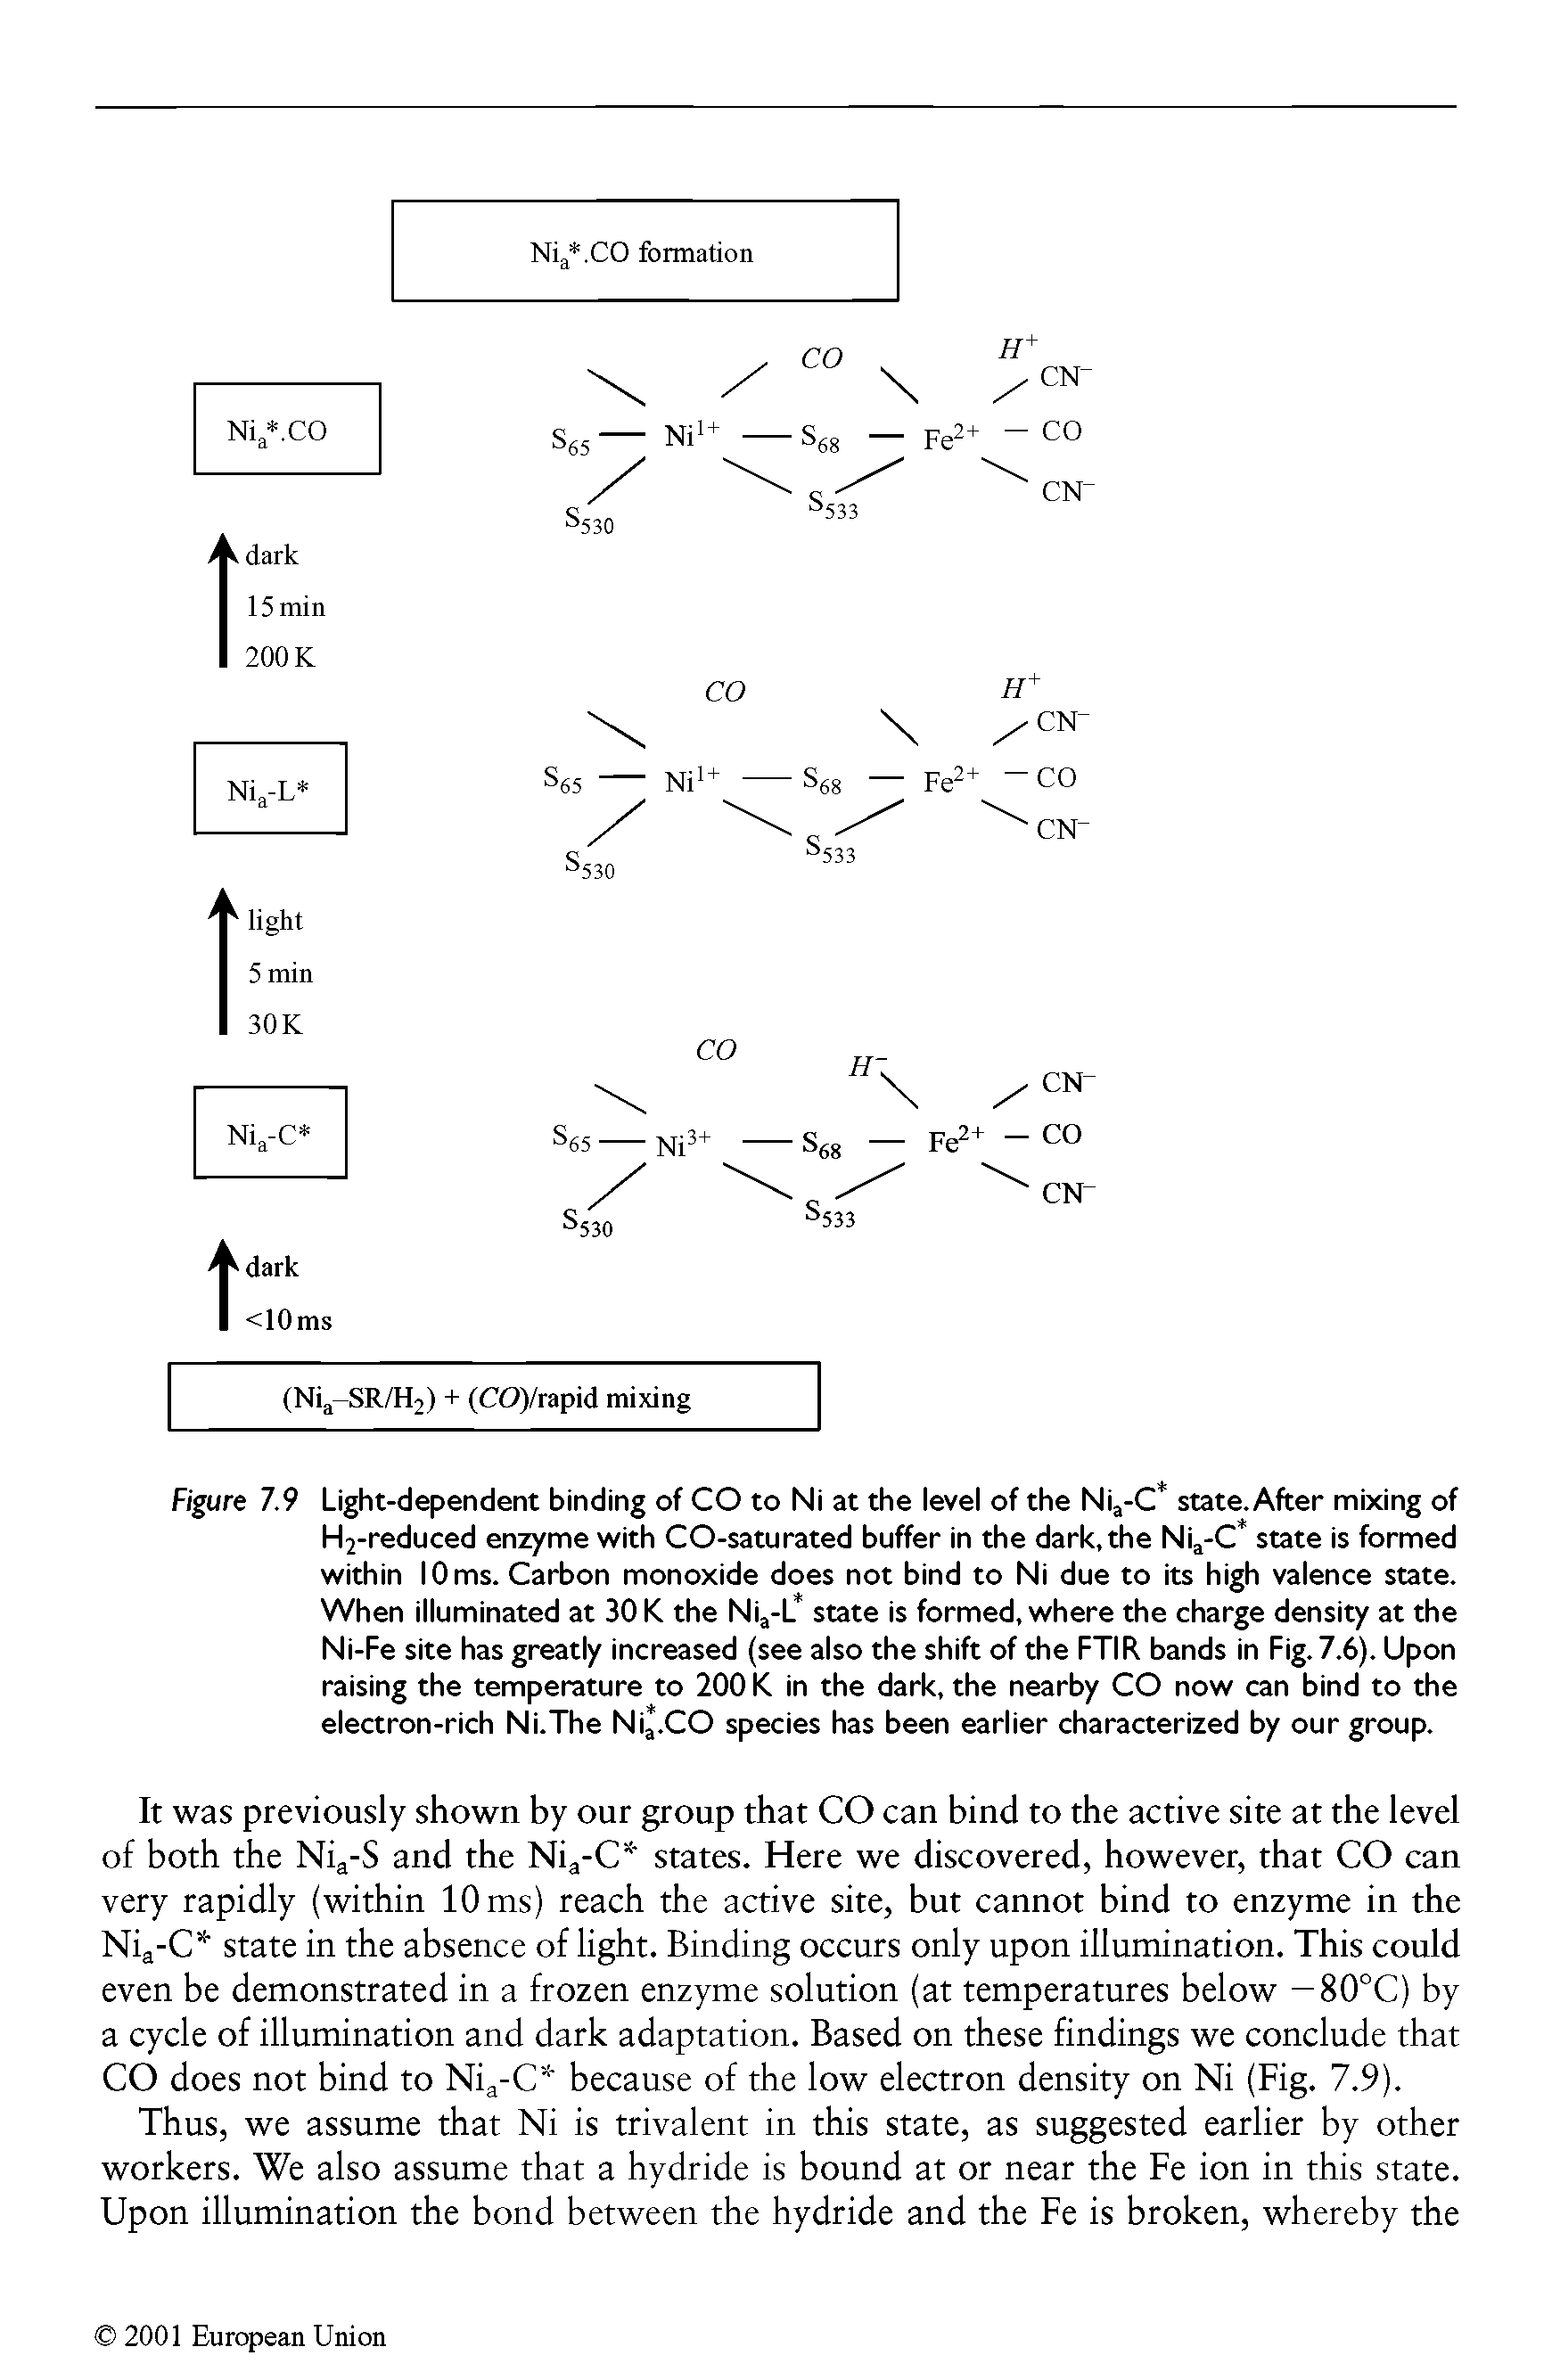 Figure 7.9 Light-dependent binding of CO to Ni at the level of the Ni -C state. After mixing of H2-reduced enzyme with CO-saturated buffer in the dark, the Nij-C state is formed within 10 ms. Carbon monoxide does not bind to Ni due to its high valence state. When illuminated at 30 K the Ni -L state is formed, where the charge density at the Ni-Fe site has greatly increased (see also the shift of the FTIR bands in Fig. 7.6). Upon raising the temperature to 200 K in the dark, the nearby CO now can bind to the electron-rich Ni.The Ni. CO species has been earlier characterized by our group.